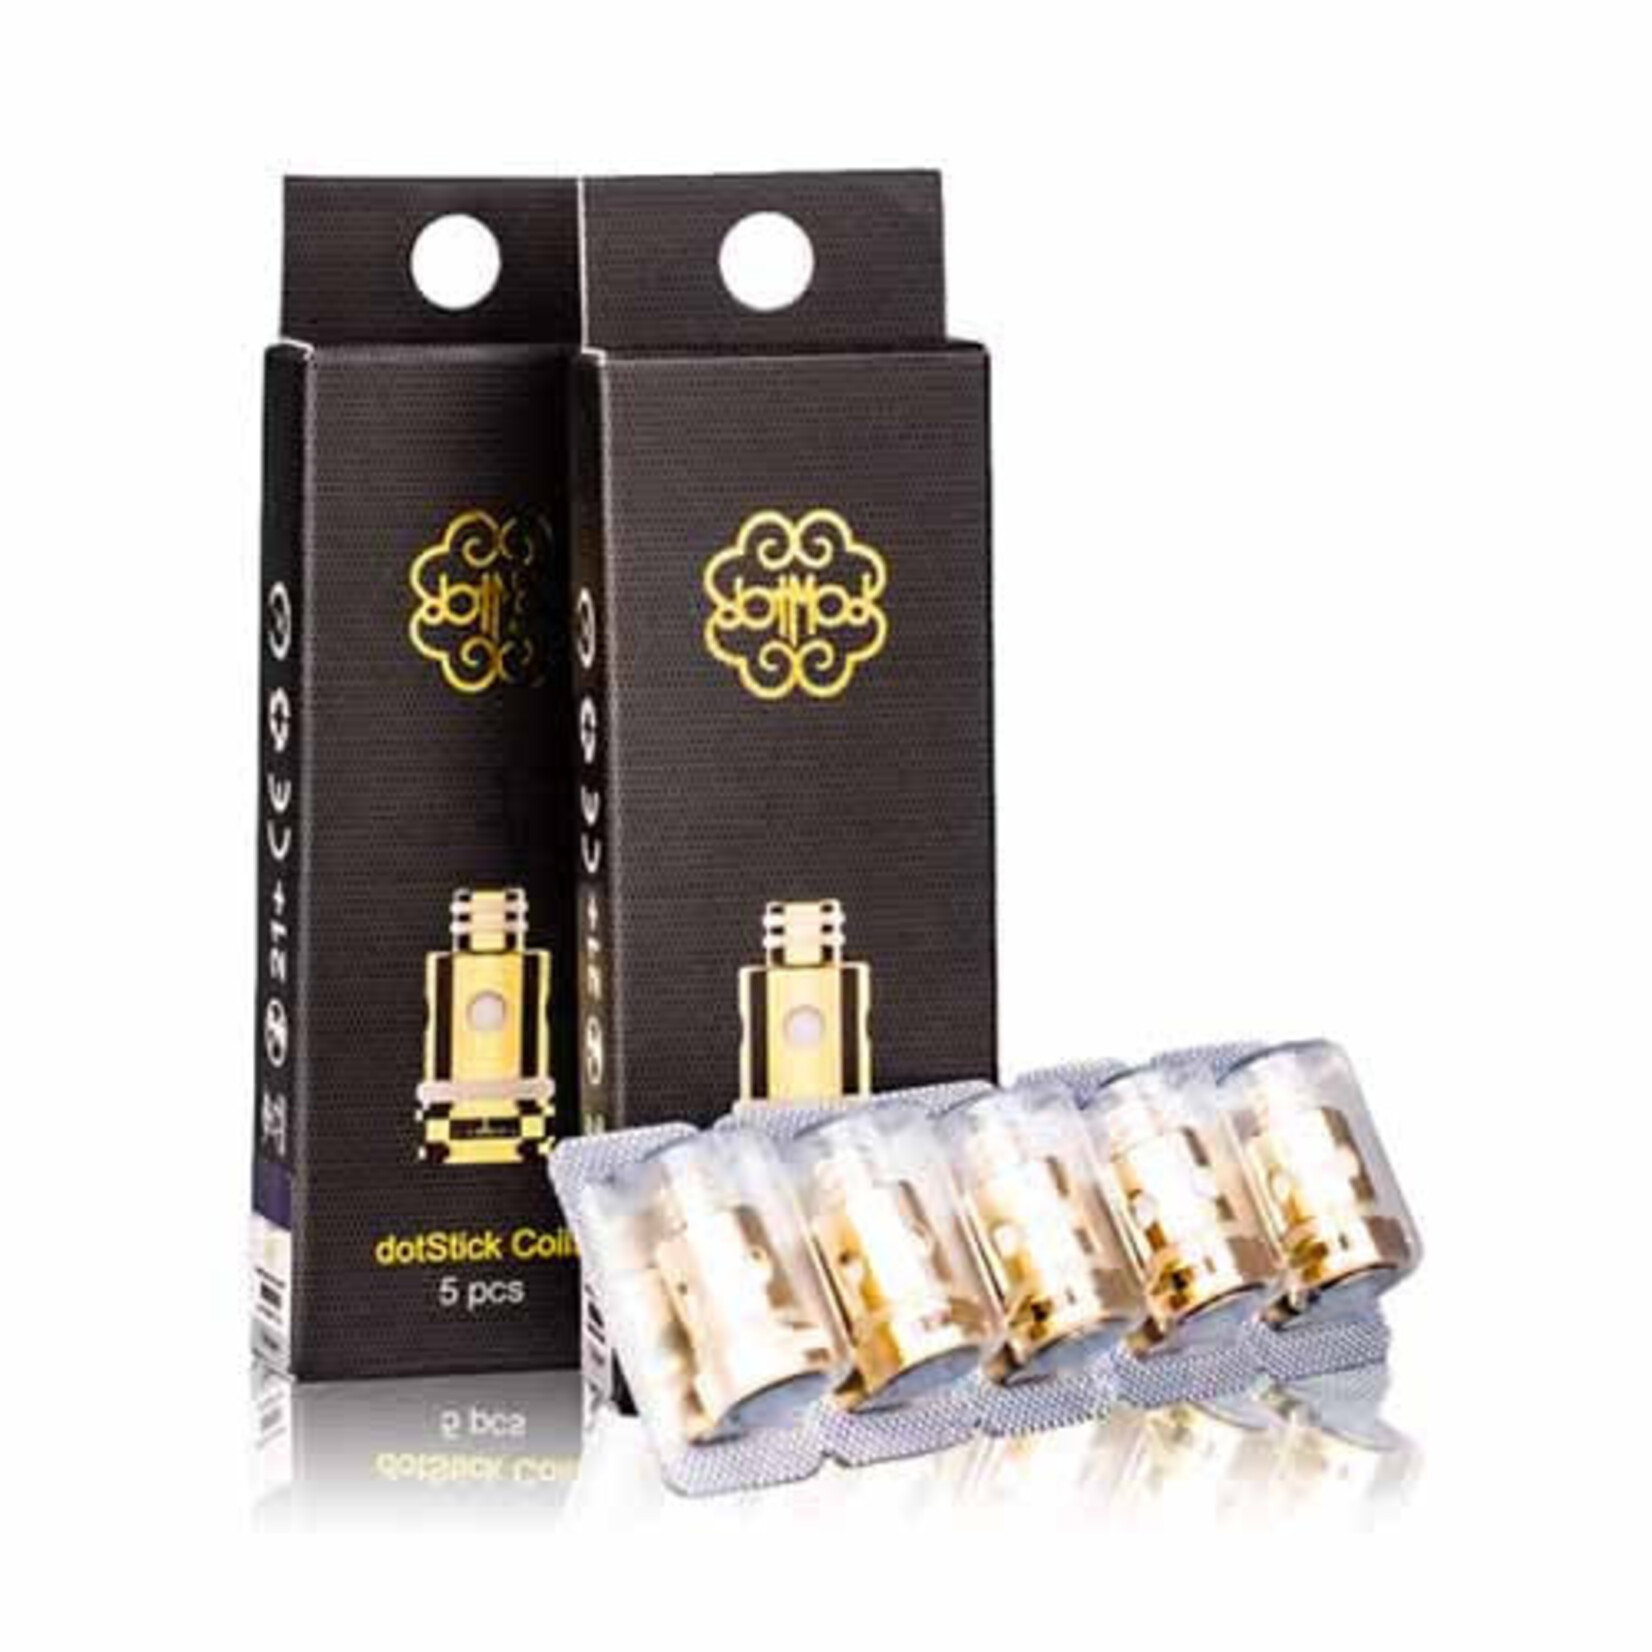 dotMod dotStick Coil (Box of 5) 0.4